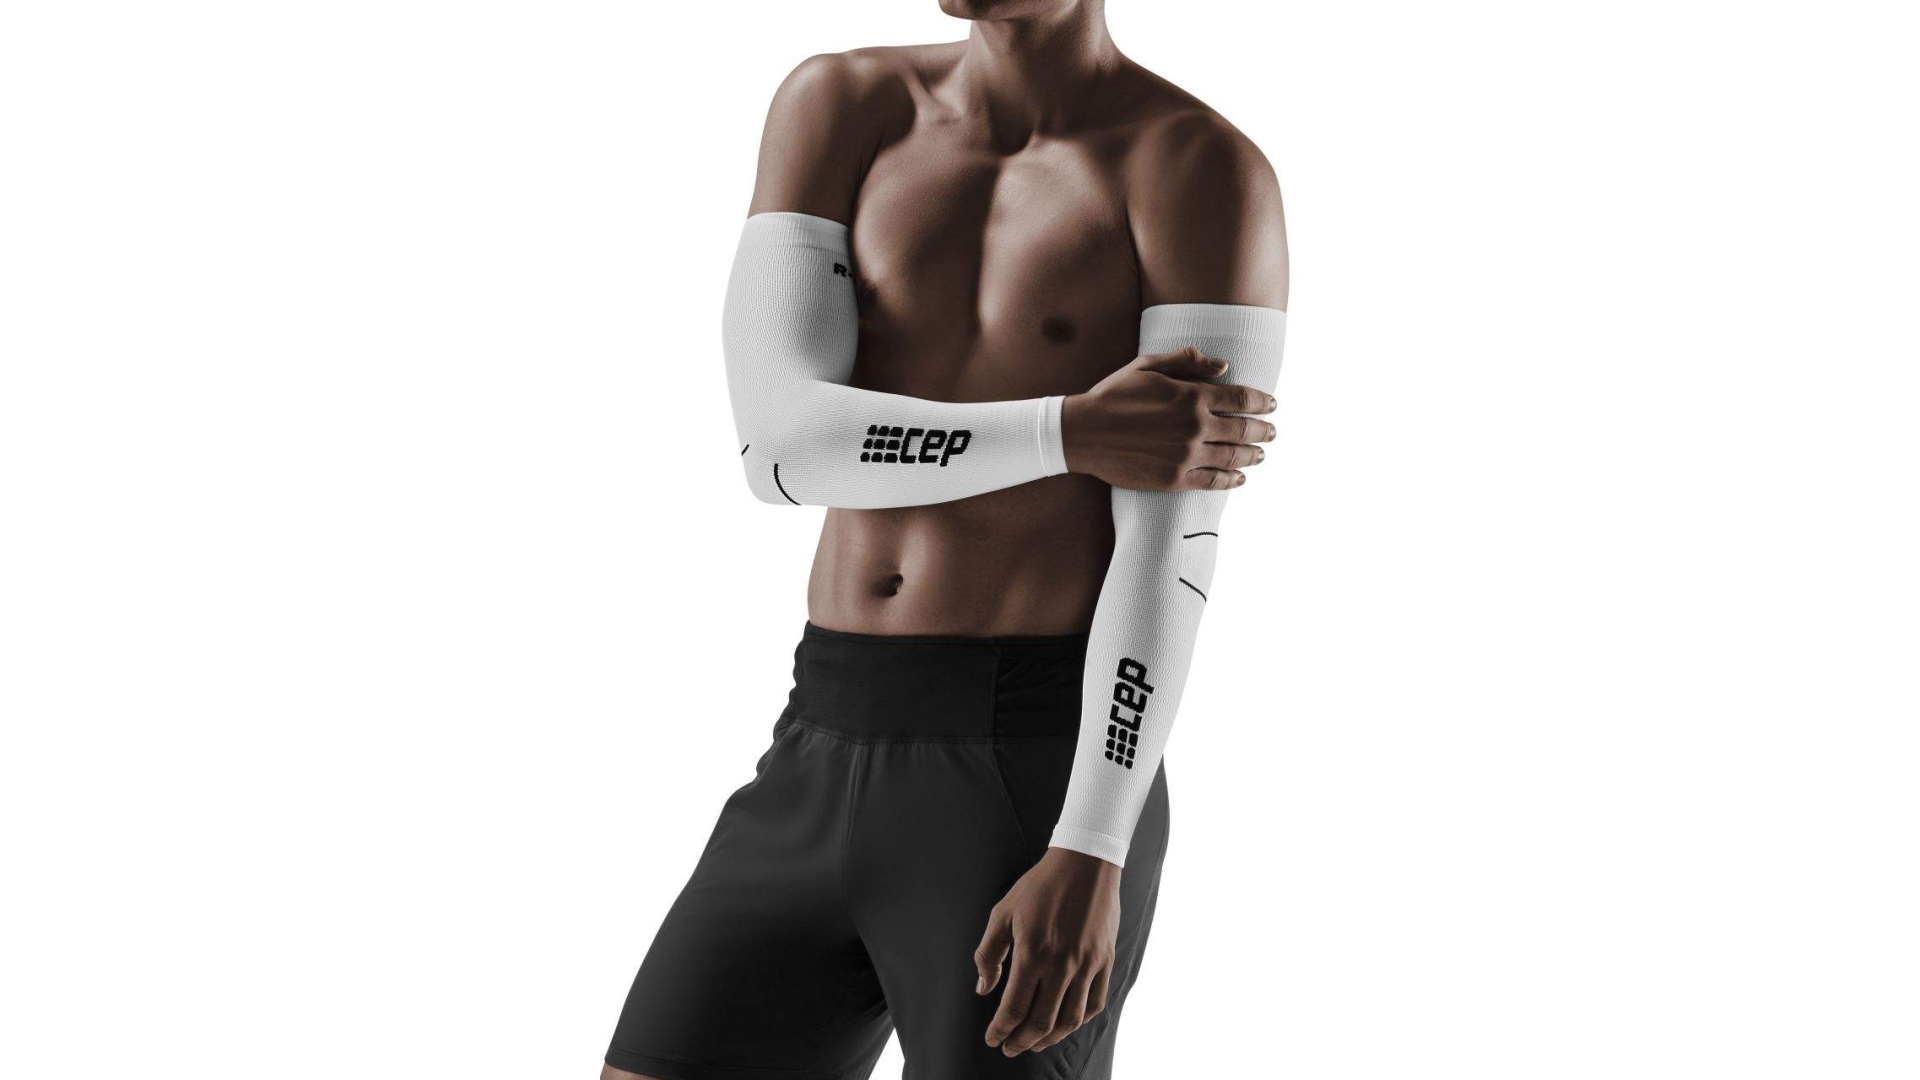 CEP Compression Arm Sleeves